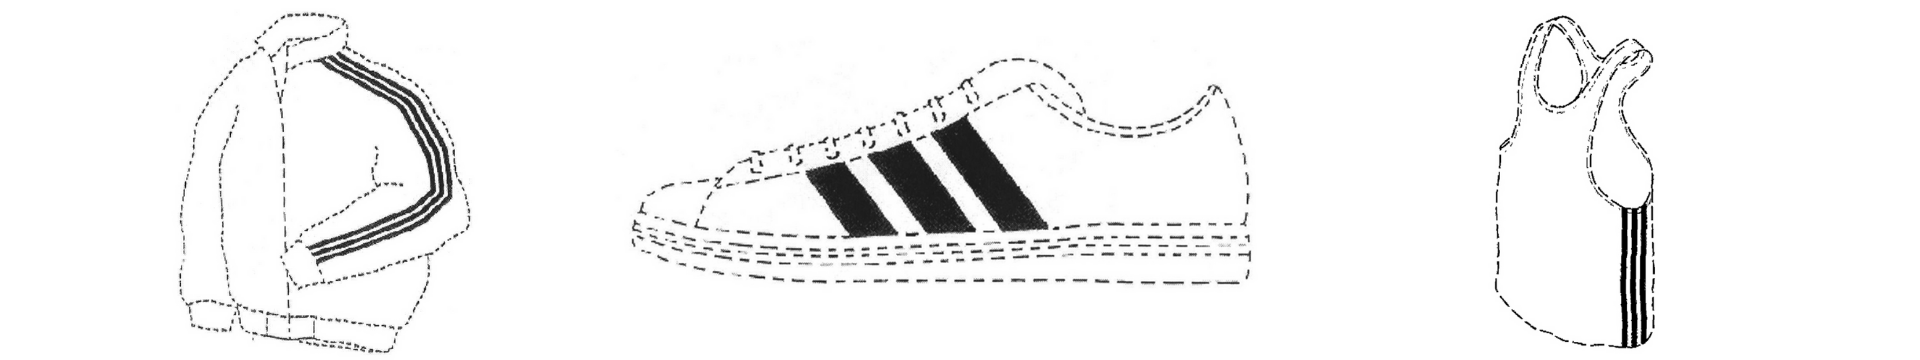 Adidas on the hunt for stripes | Adidas vs. Thom Browne | Blog | Chiever